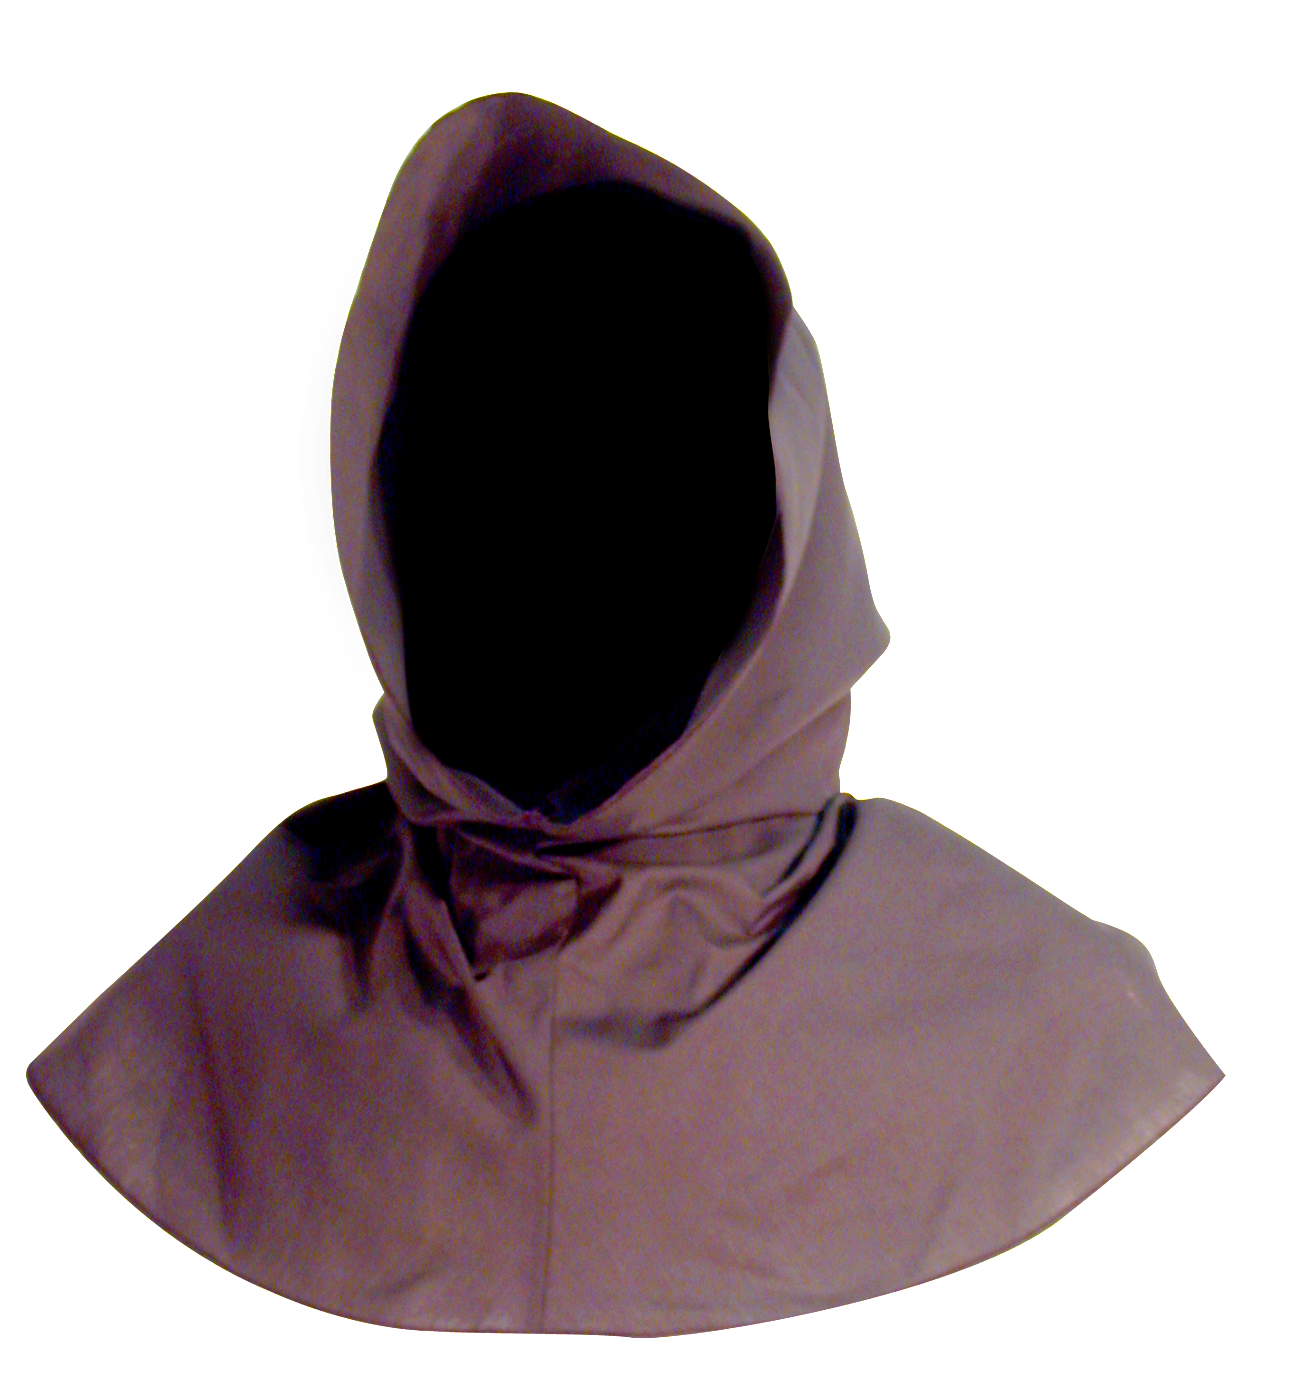 Ranger's Hood from White Pavilion Costumes, front view. This hood is perfect for medieval, fantasy, elf, grim reaper, executioner, Ringwraith or Nazgul, Christmas Past, vampire, Halloween and other costumes.